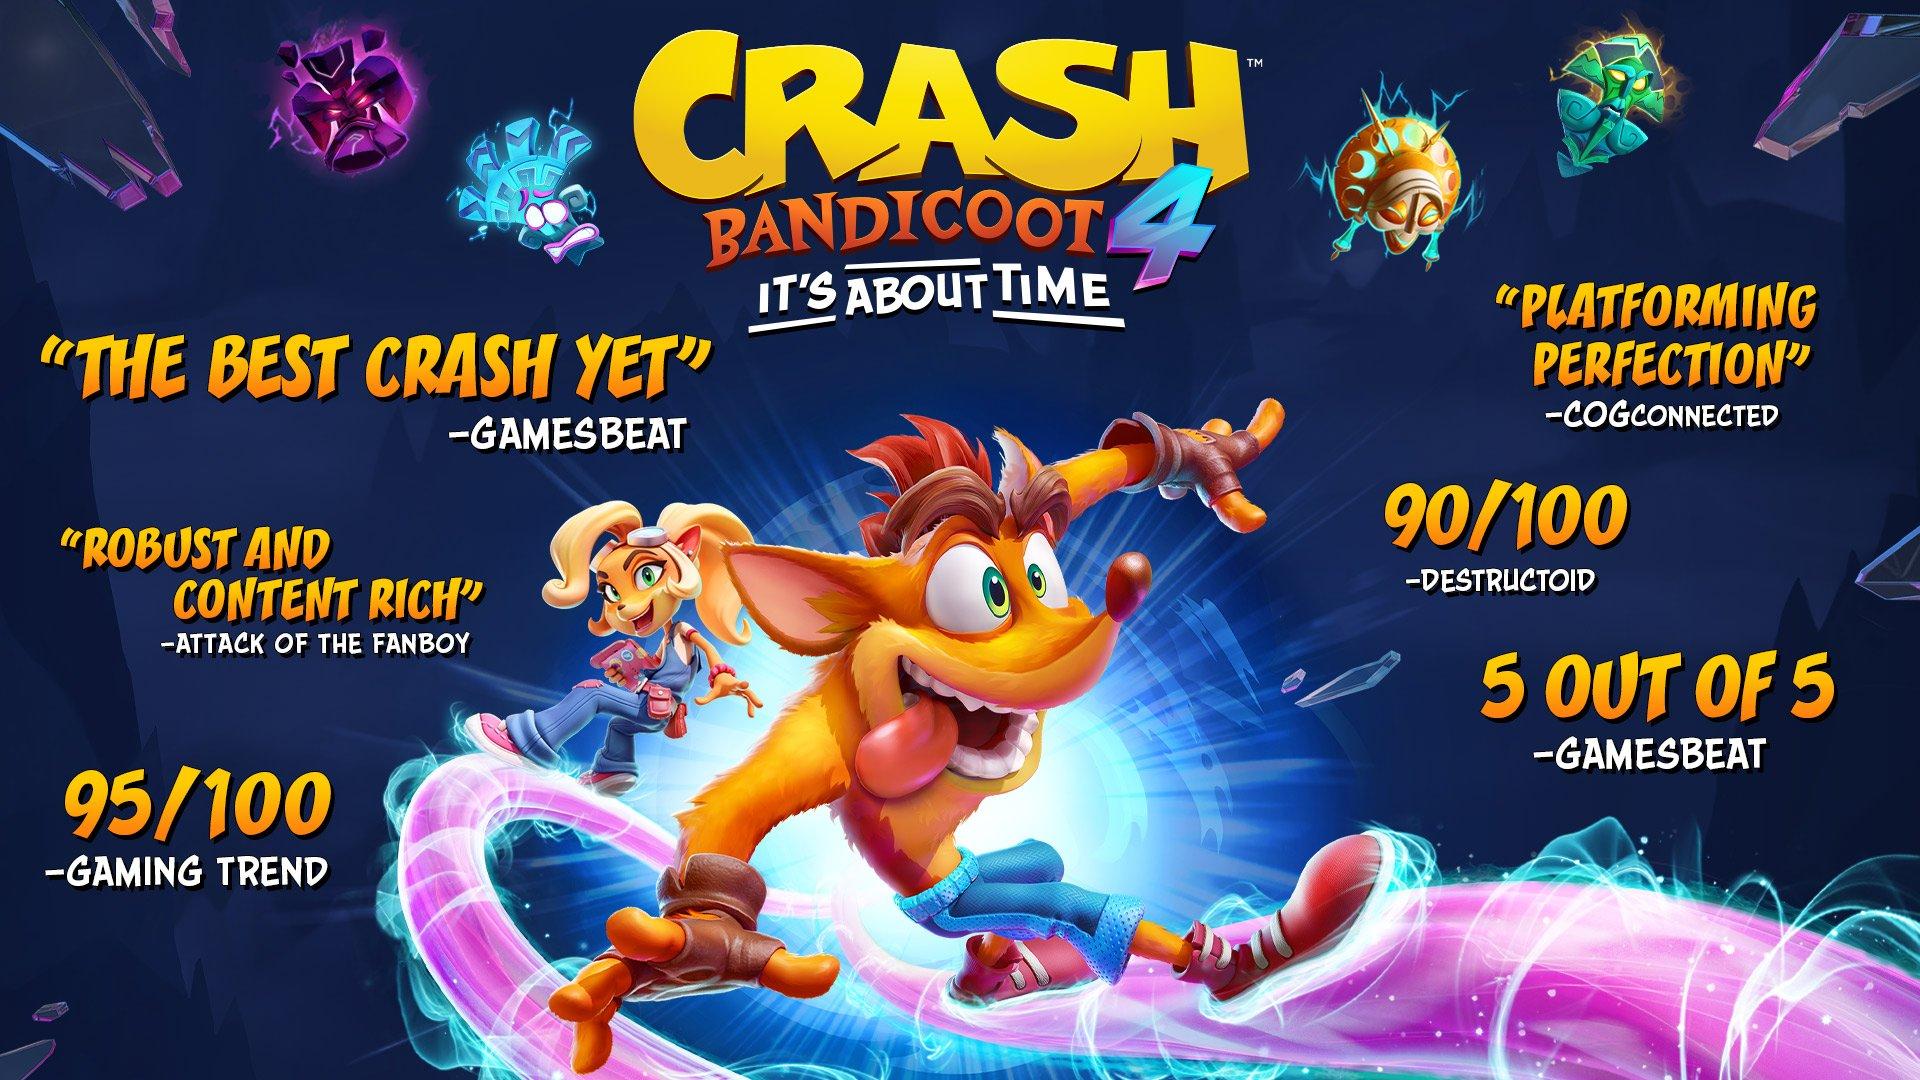 Crash Bandicoot 4 [ It's About Time ] (PS4) NEW